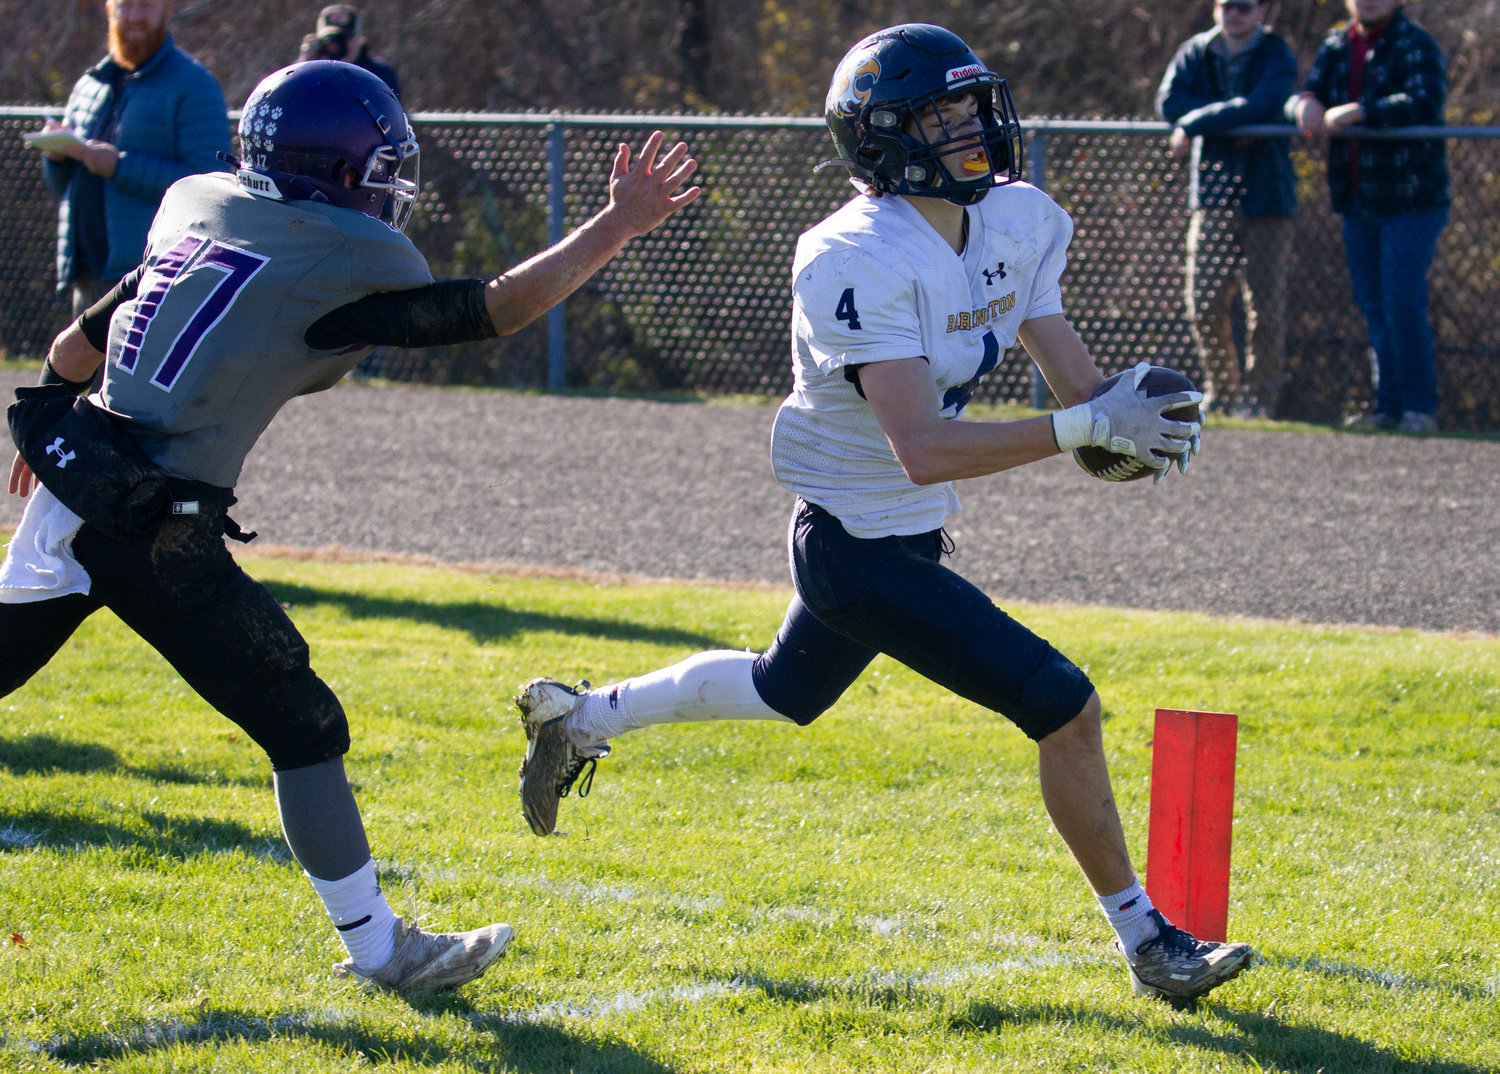 Running back Mitch Ivatts stretches out for a touchdown in the second quarter.